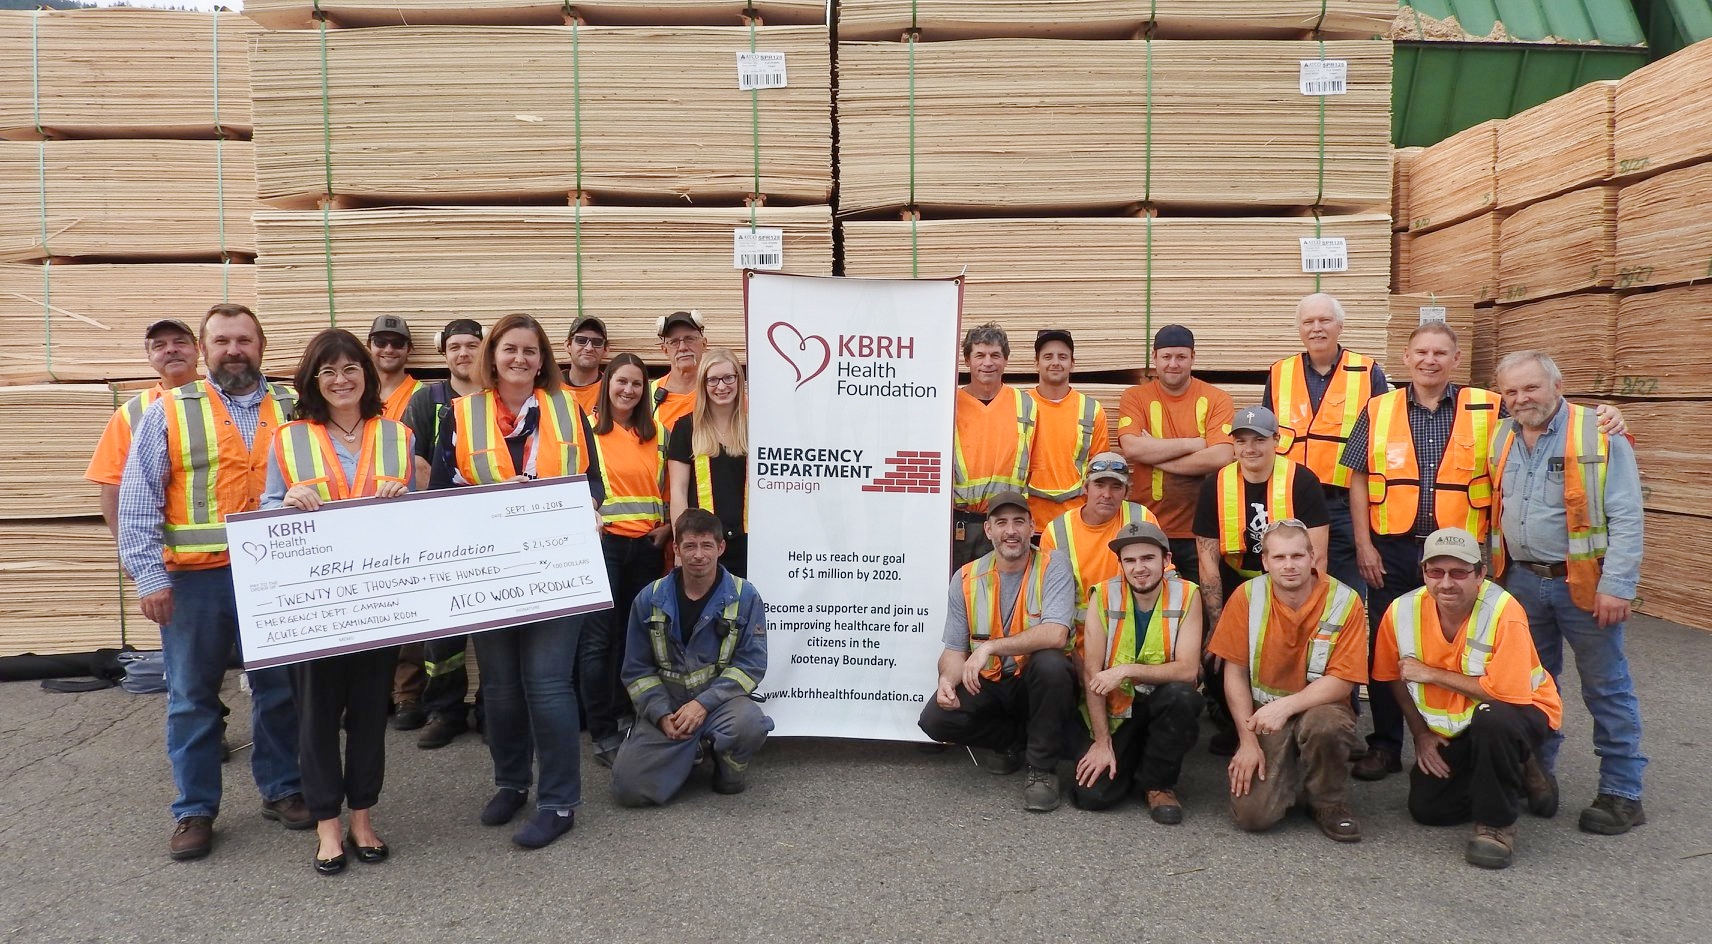  The KBRH Health Foundation has received $21,500 from ATCO Wood Products Ltd. for the Emergency Department Campaign. 